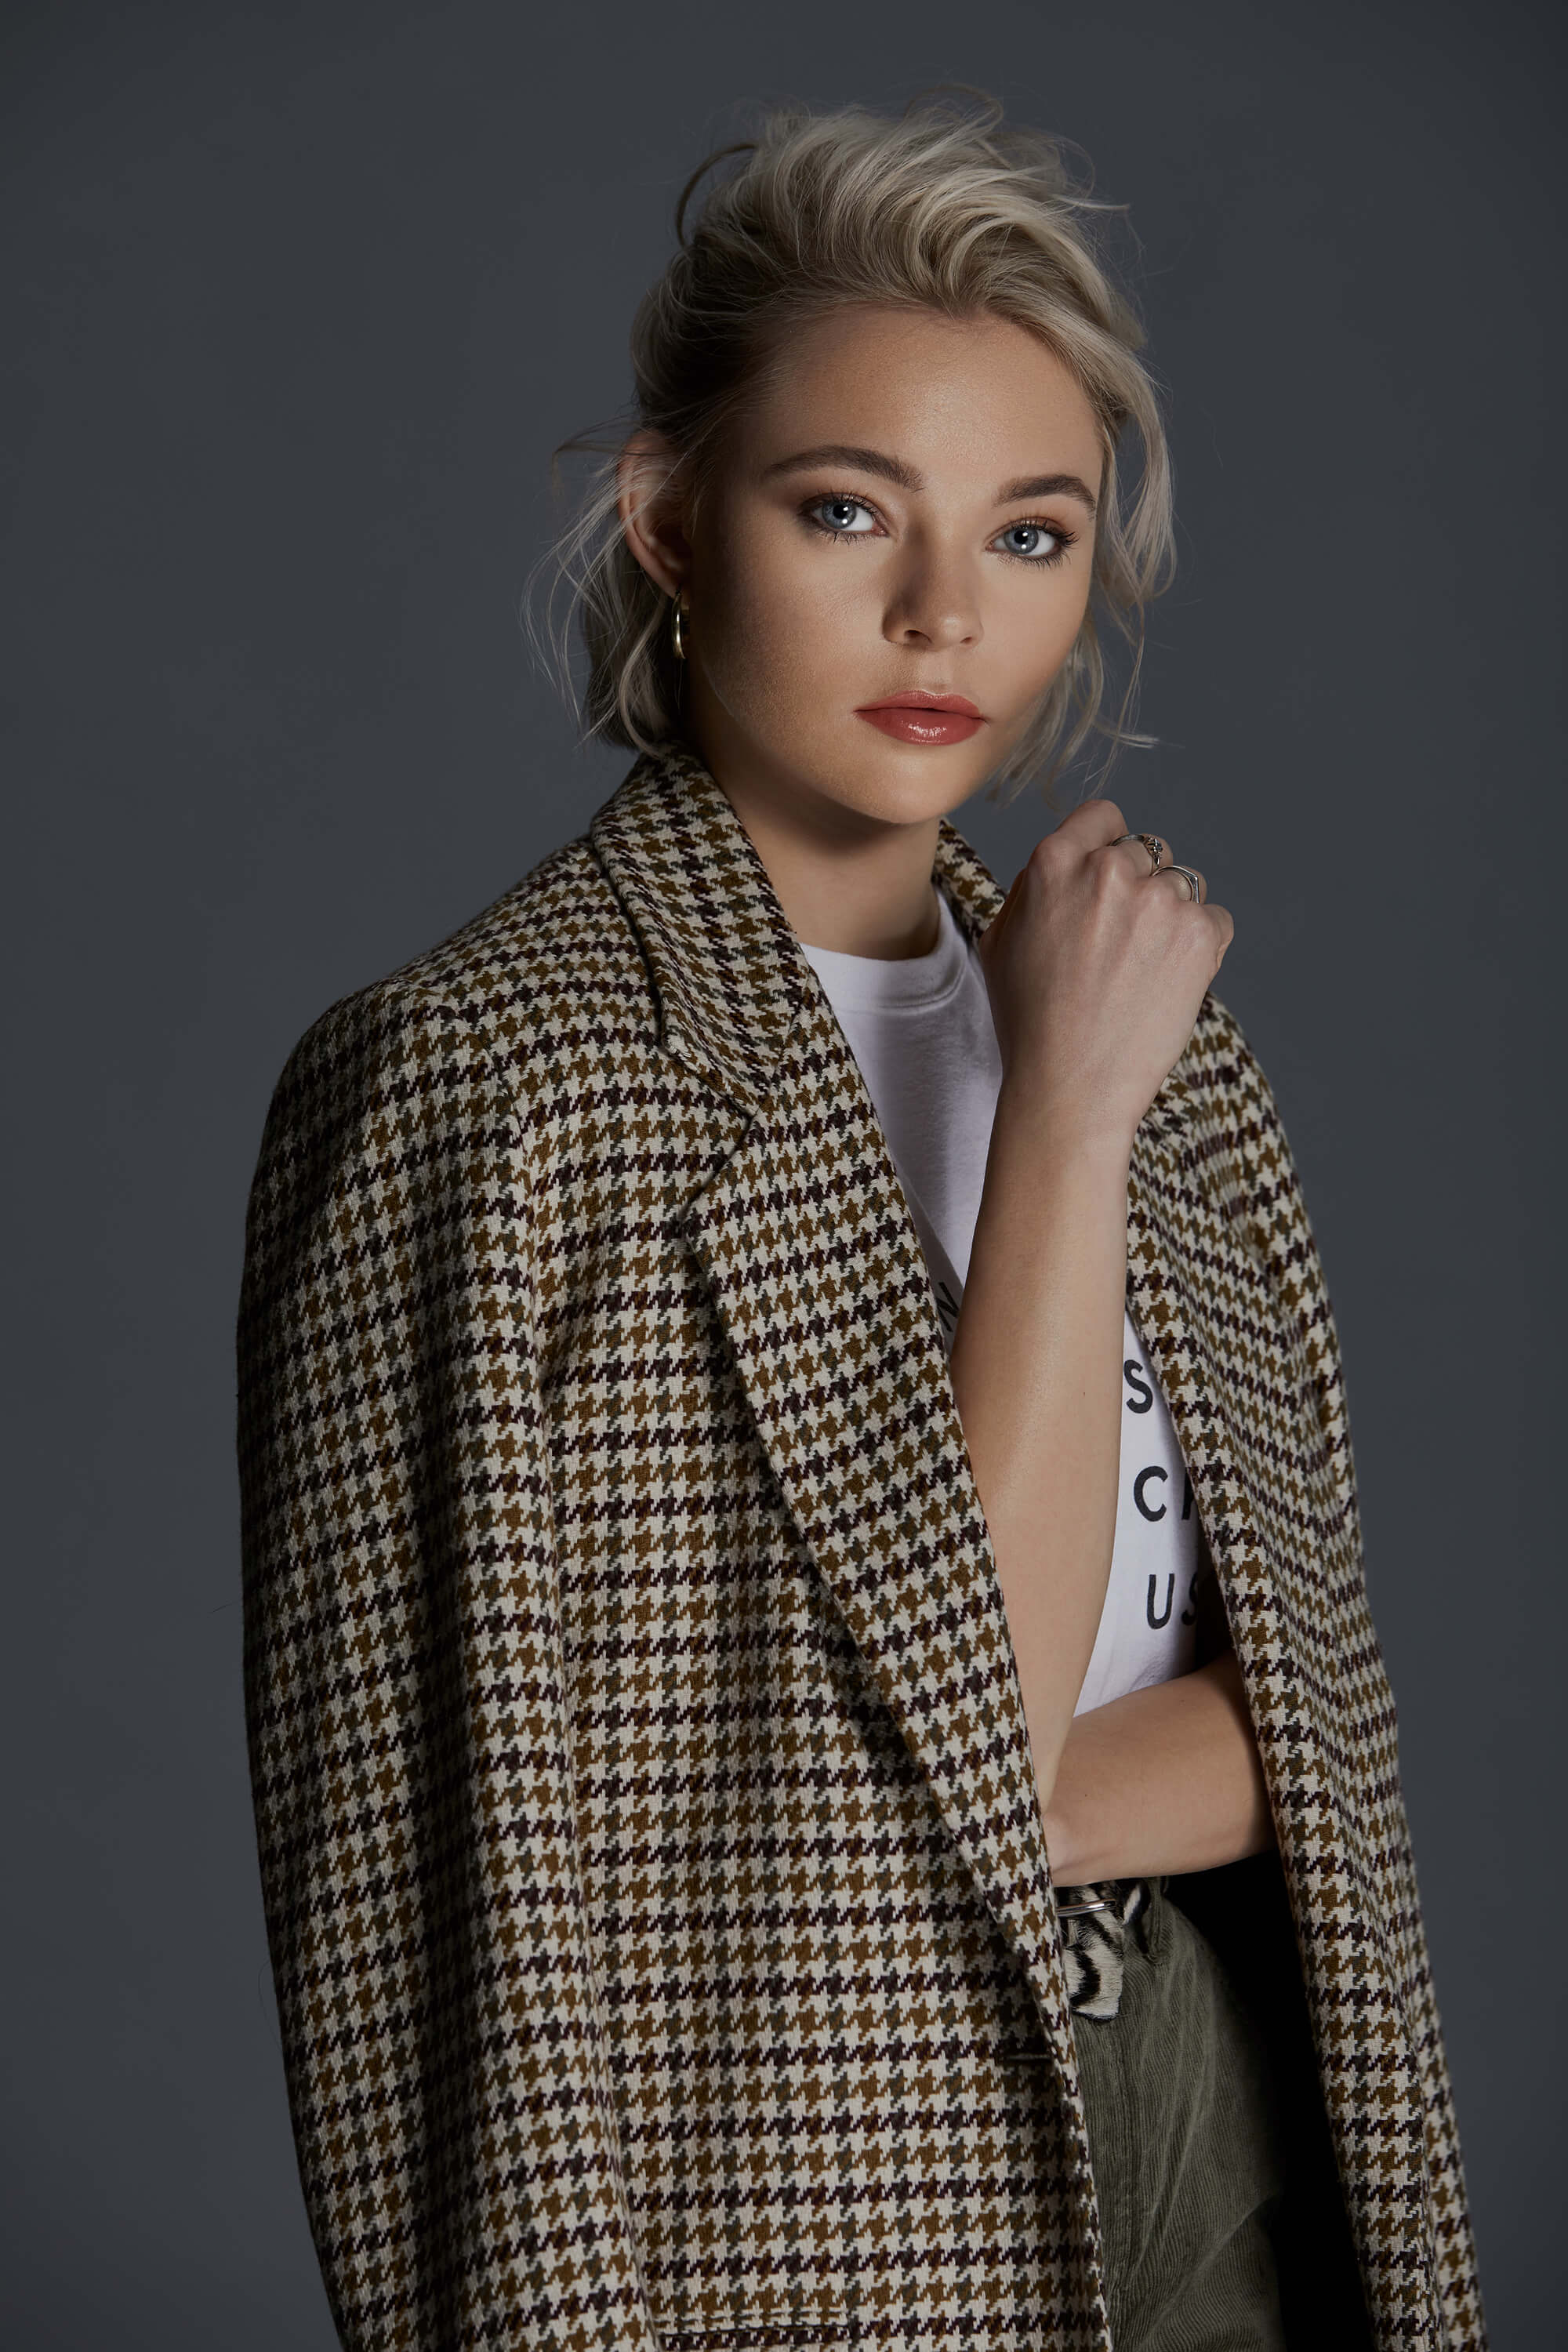 Taylor Hickson interview